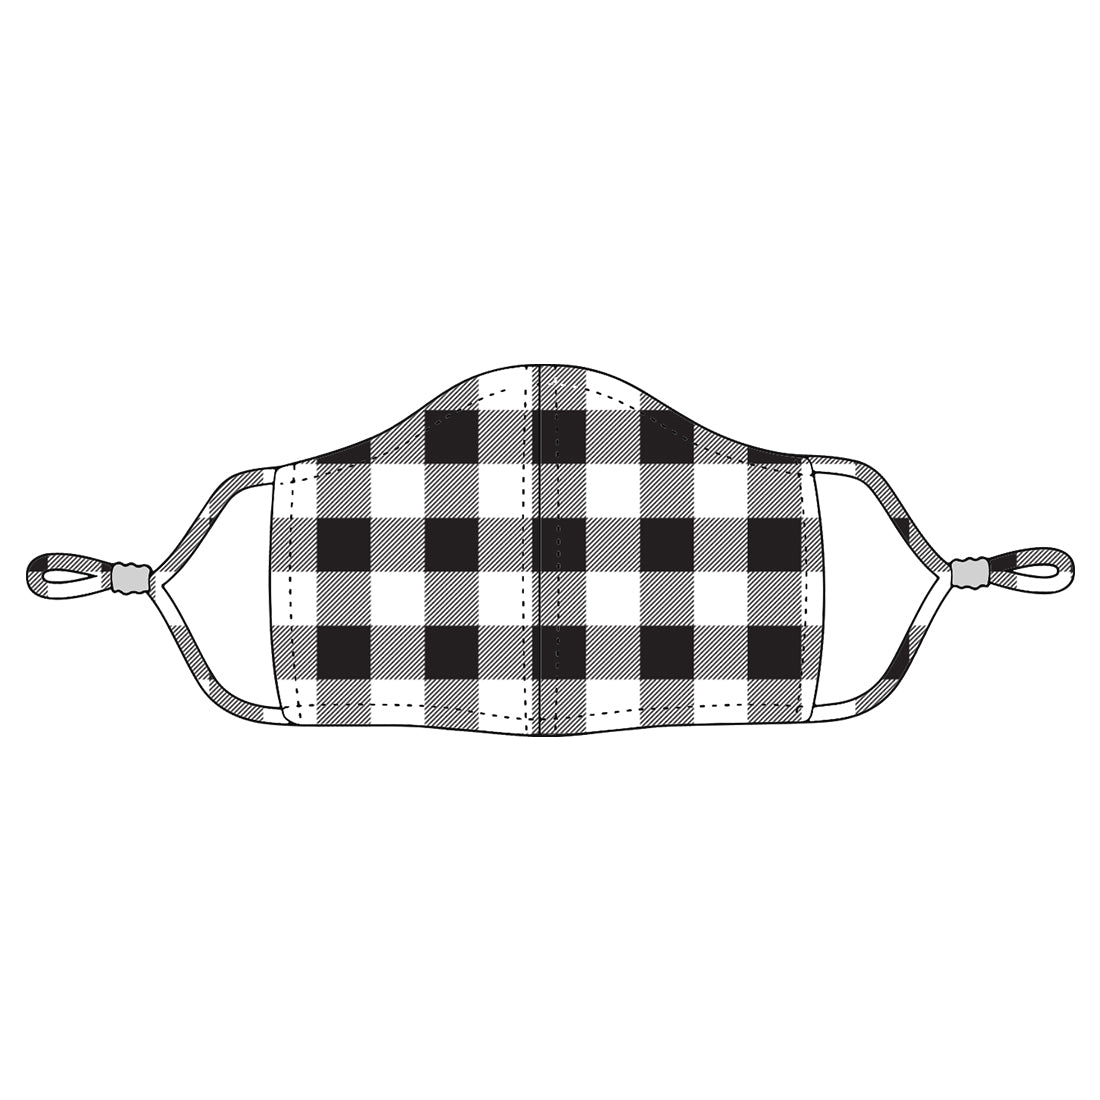 Buffalo Check Adjustable Adult Face Mask - Red/Black or White/Black